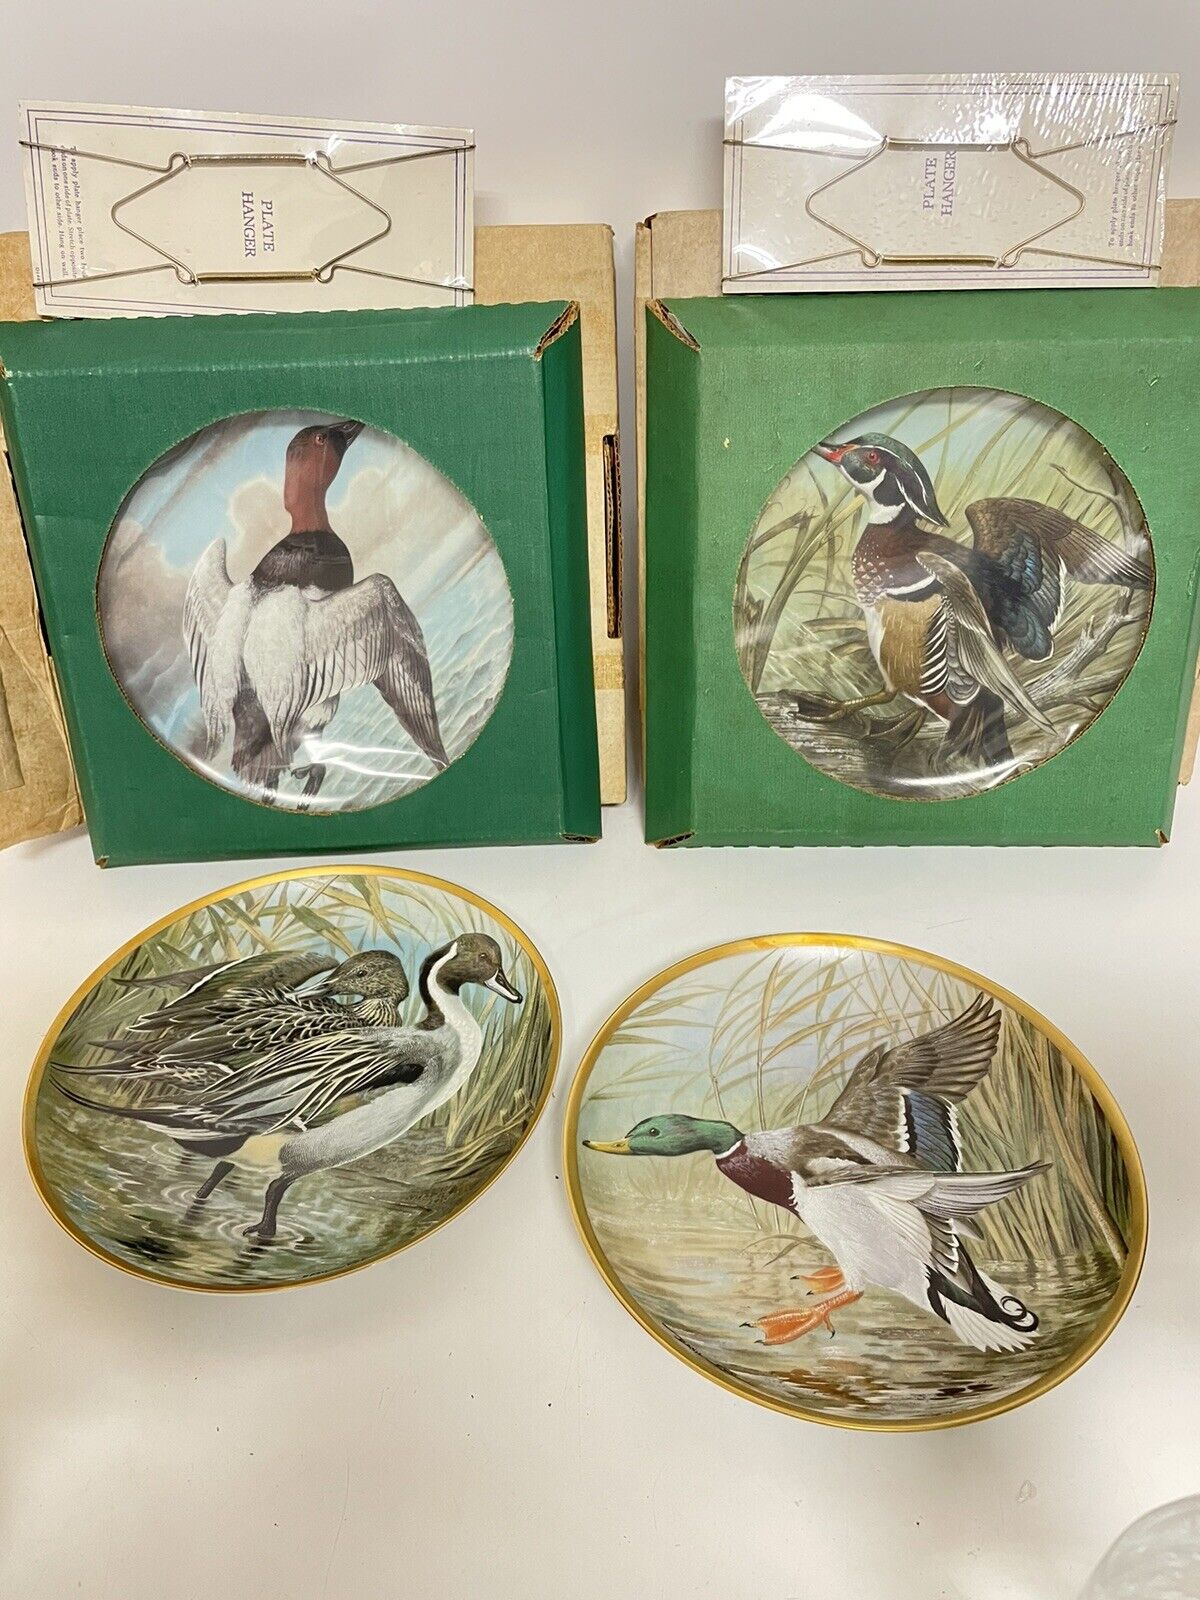 4 Franklin Porcelain Plate 1981 Water Birds Of The World Wood Duck By Basil Ede